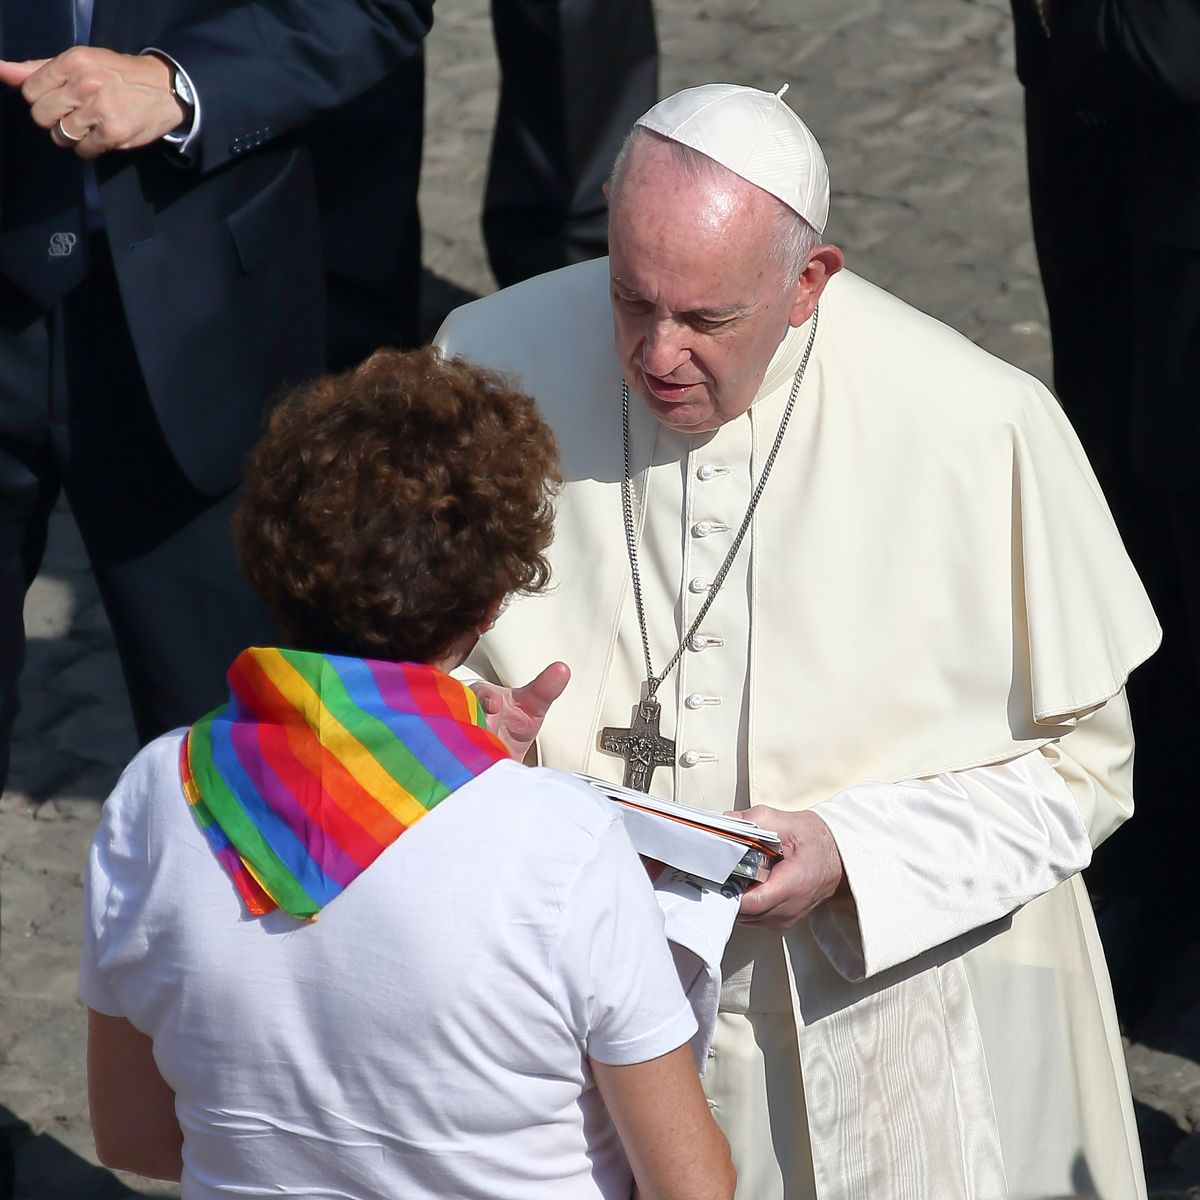 Pope Francis Tells Parents God Loves LGBTQ Children As They Are